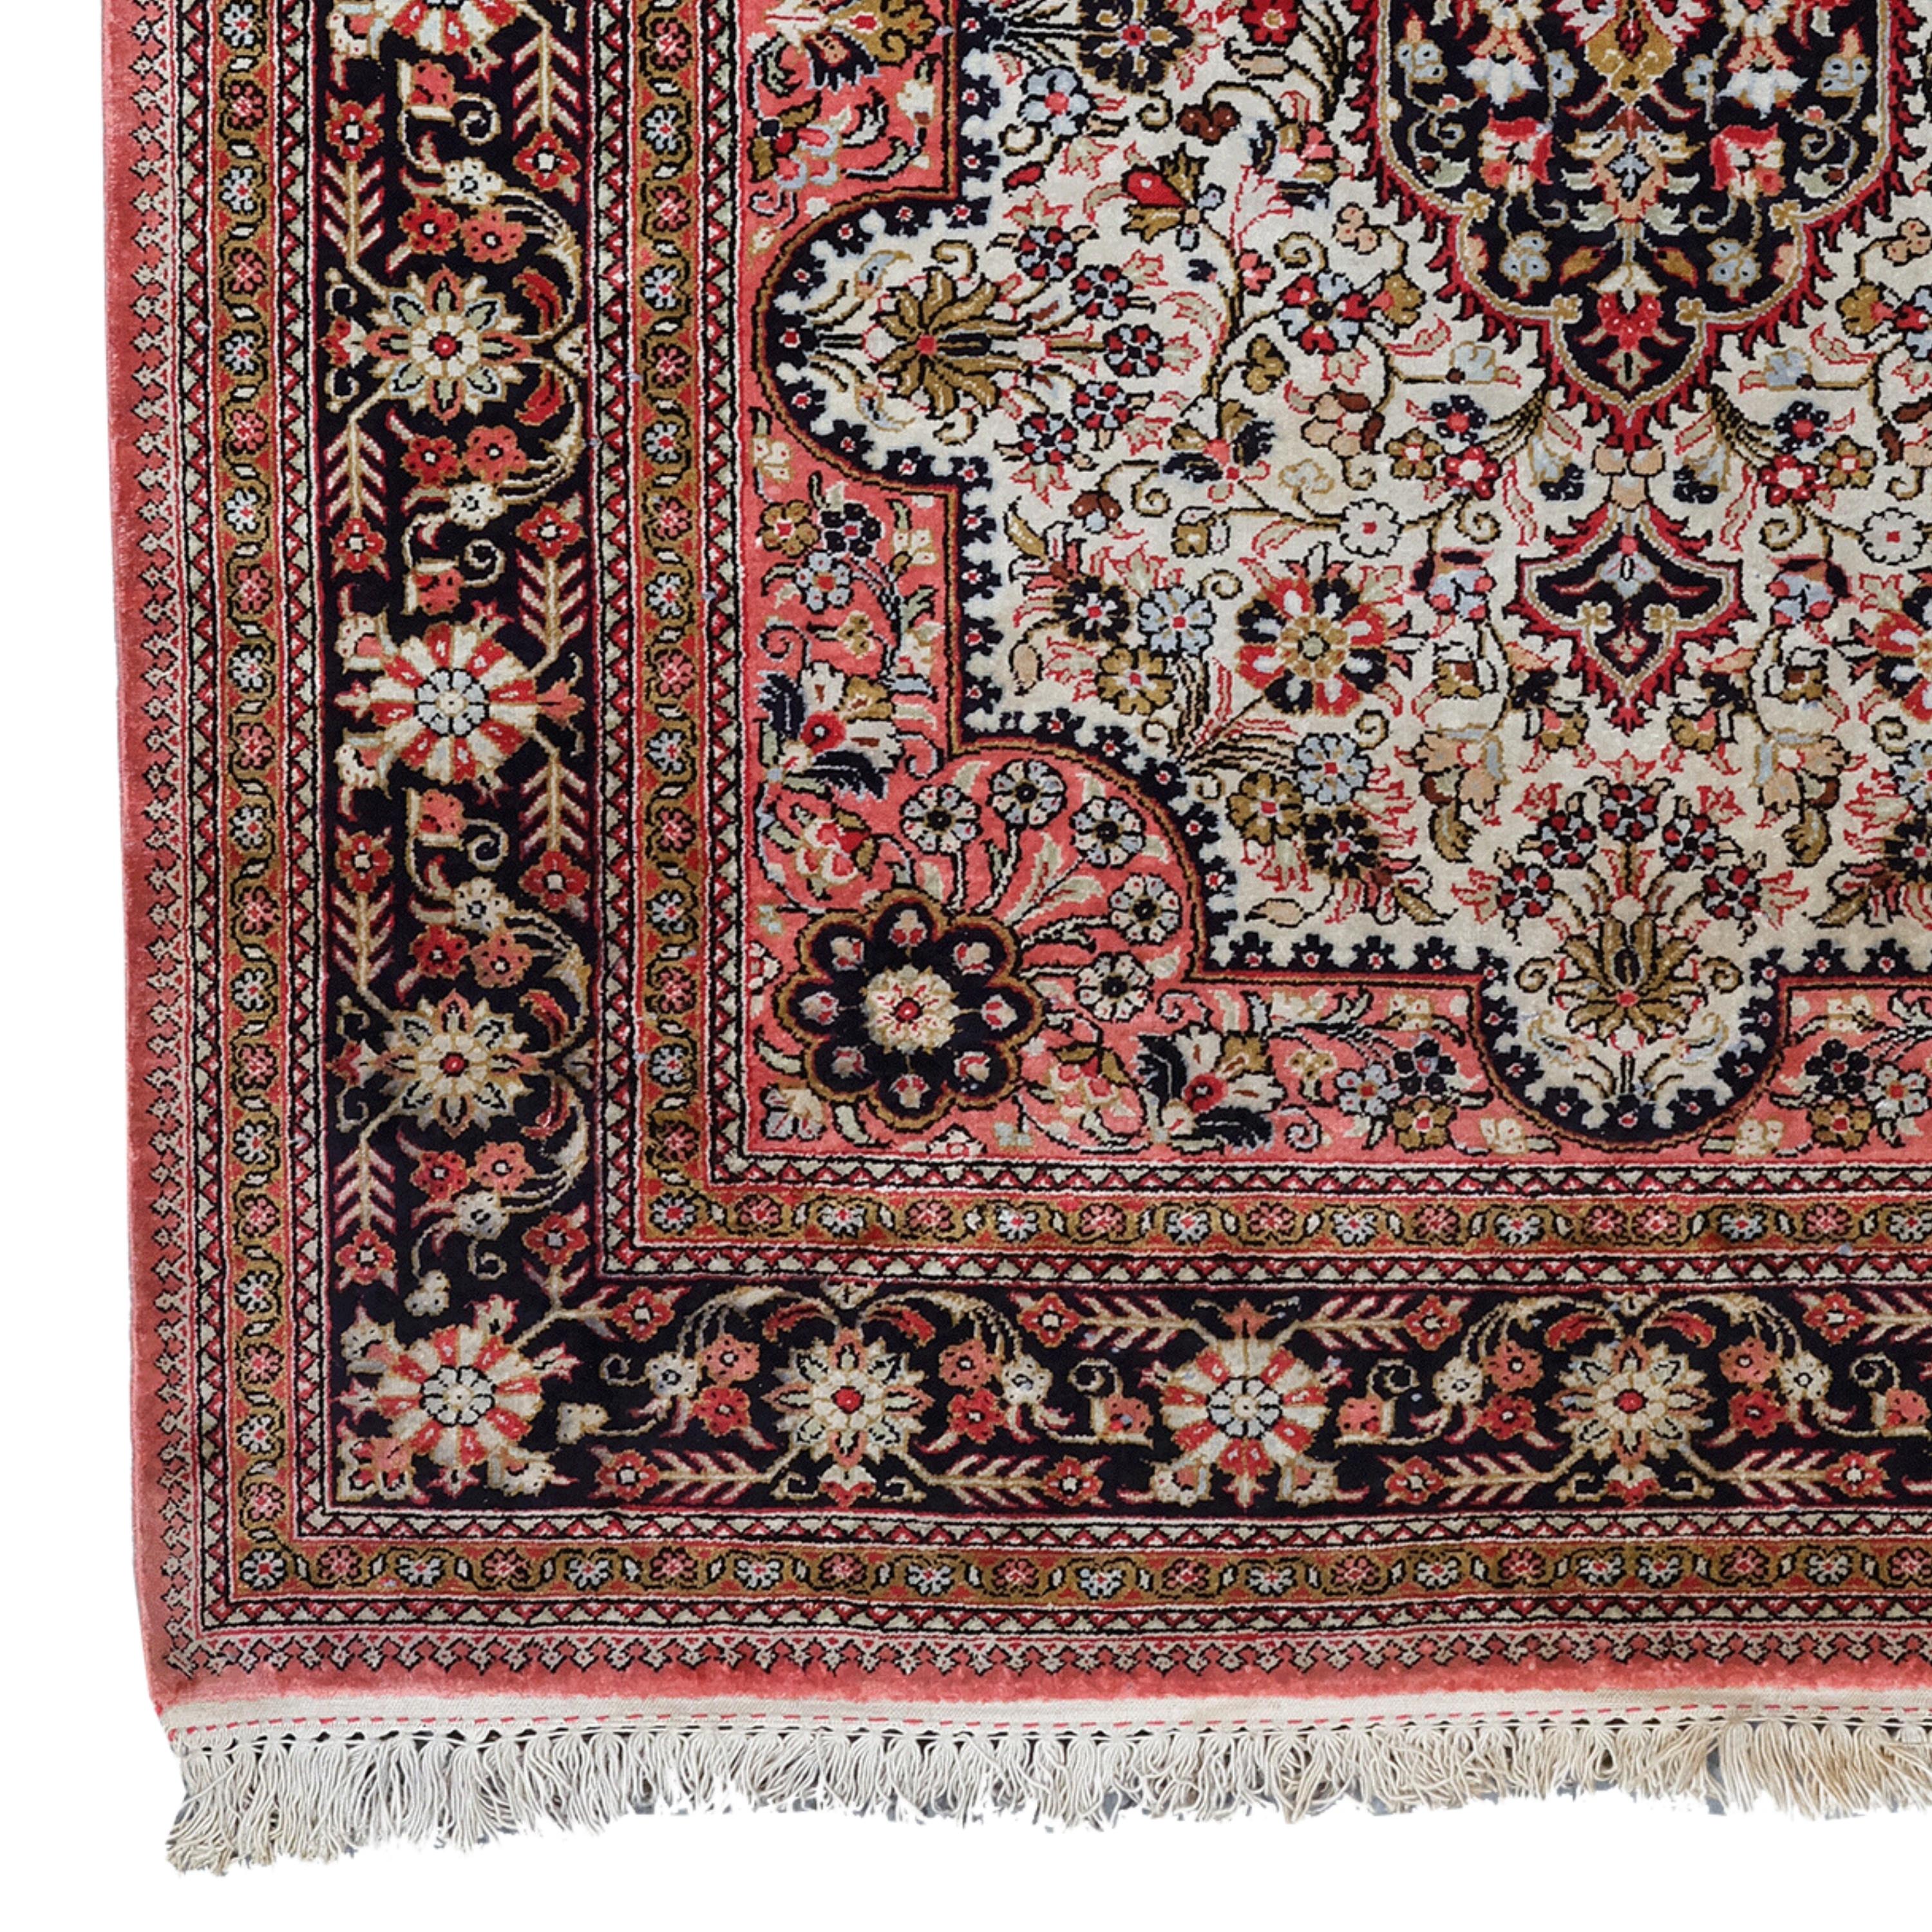 19th Century Silk Qum Rug

This magnificent 19th-century antique Qum (Gohm) rug offers not just decor, but a slice of history. Every intricate detail woven into this masterpiece tells a story of the past and reflects the skillful craftsmanship and